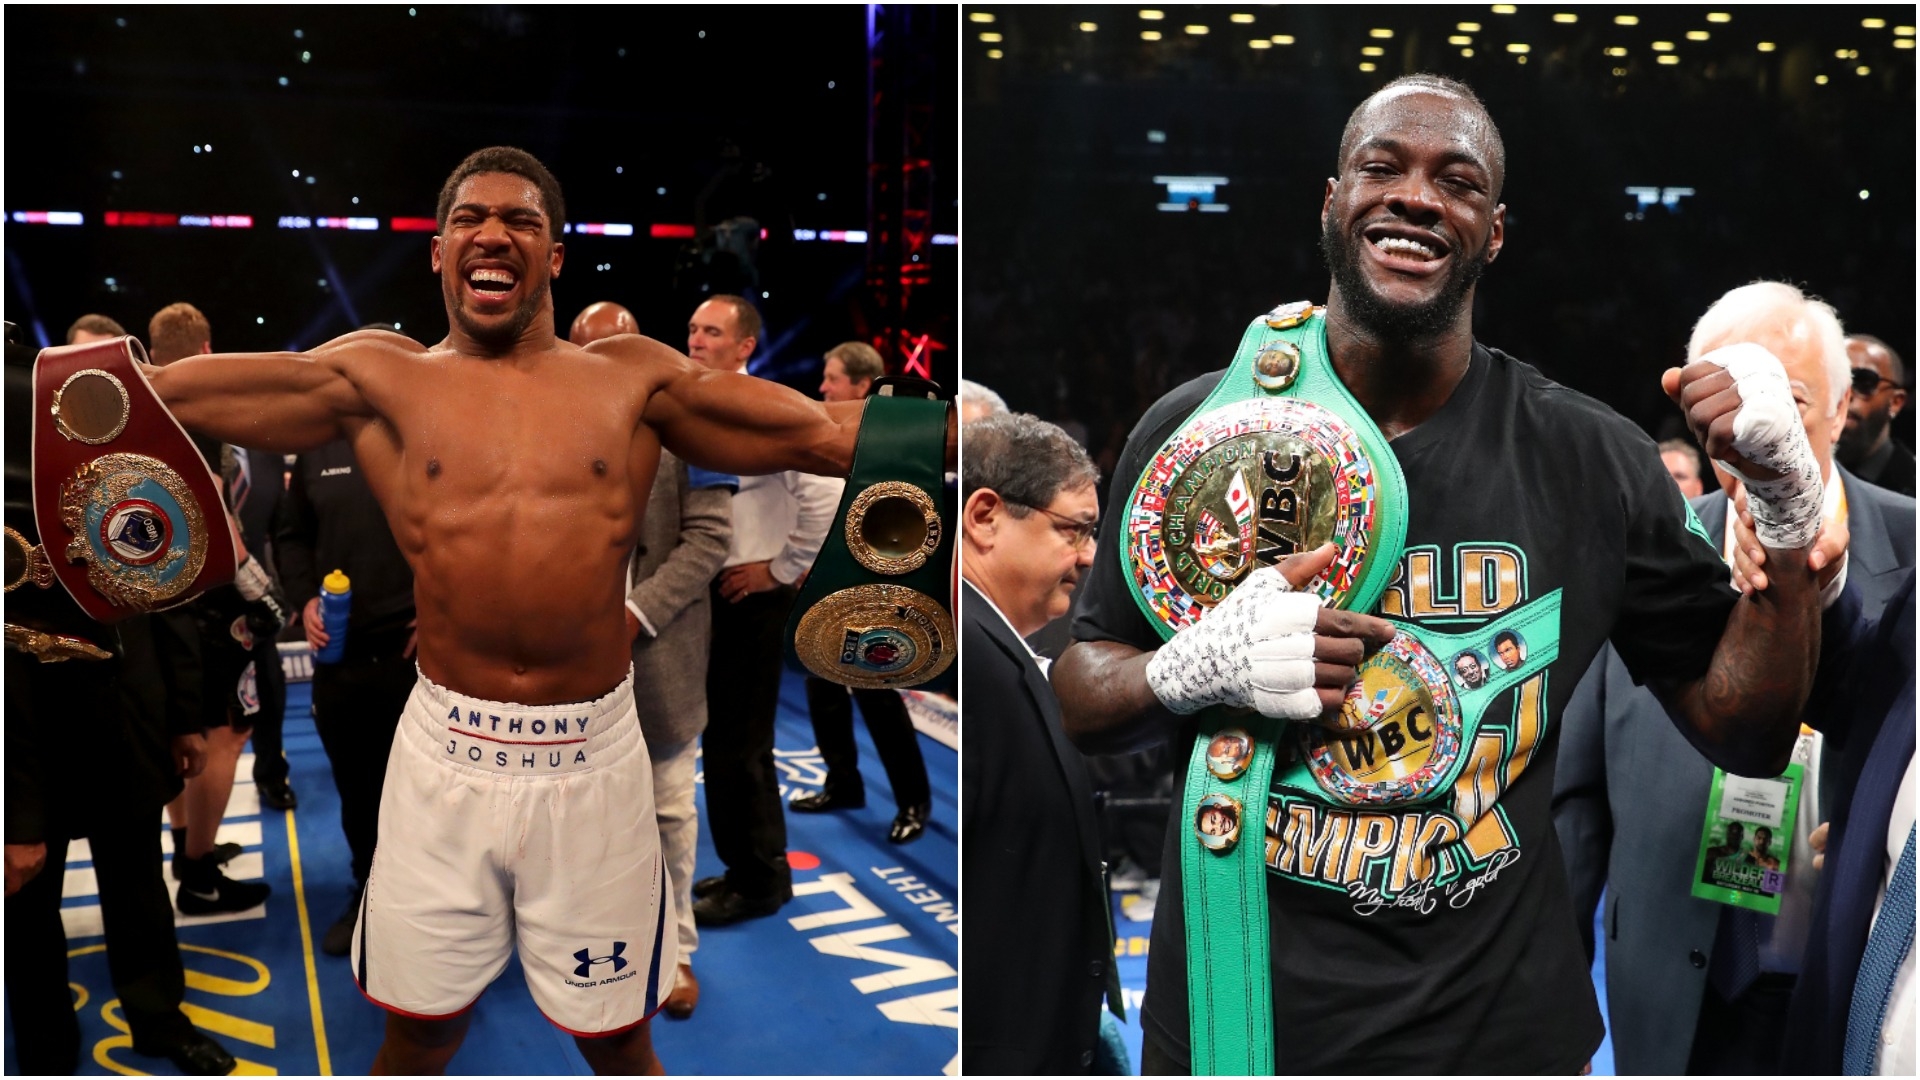 Anthony Joshua-Deontay Wilder must be next, says promoter Eddie Hearn - The Ring